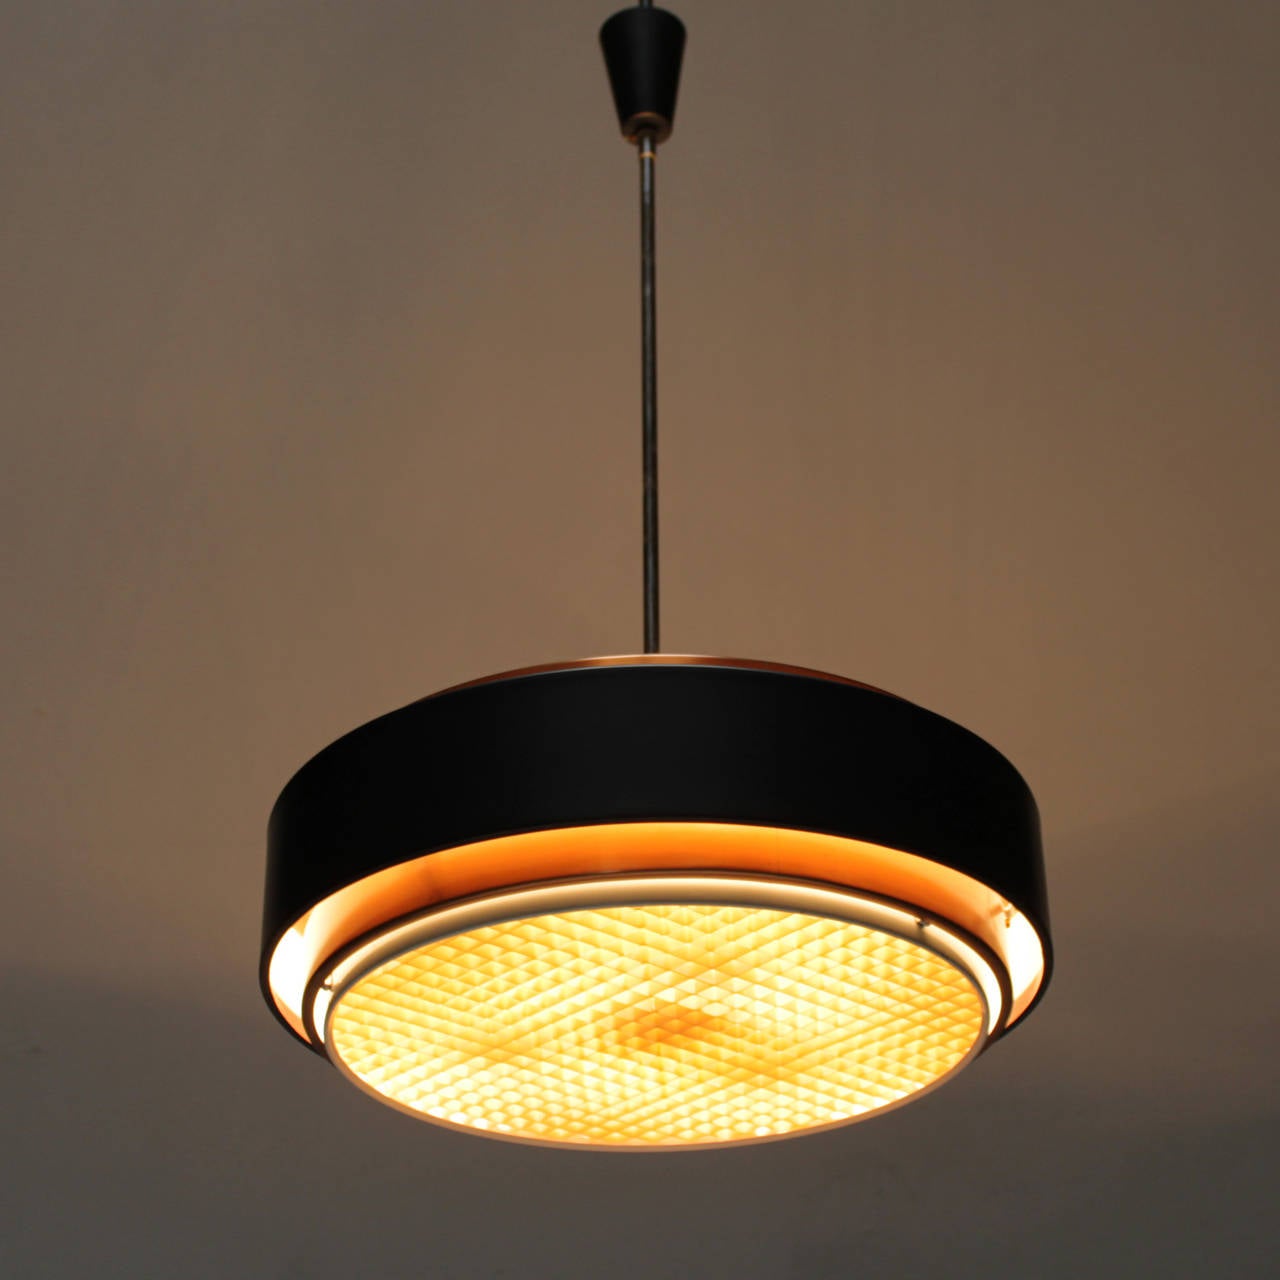 Pendant by Niek Hiemstra for Evolux Holland. Three porcelain sockets. Plastics diffuser.
In 1934 Niek Hiemstra and his brother in law founded the lighting firm Hiemstra & Evenblij. After his companion left the business in 1952 Hiemstra went on